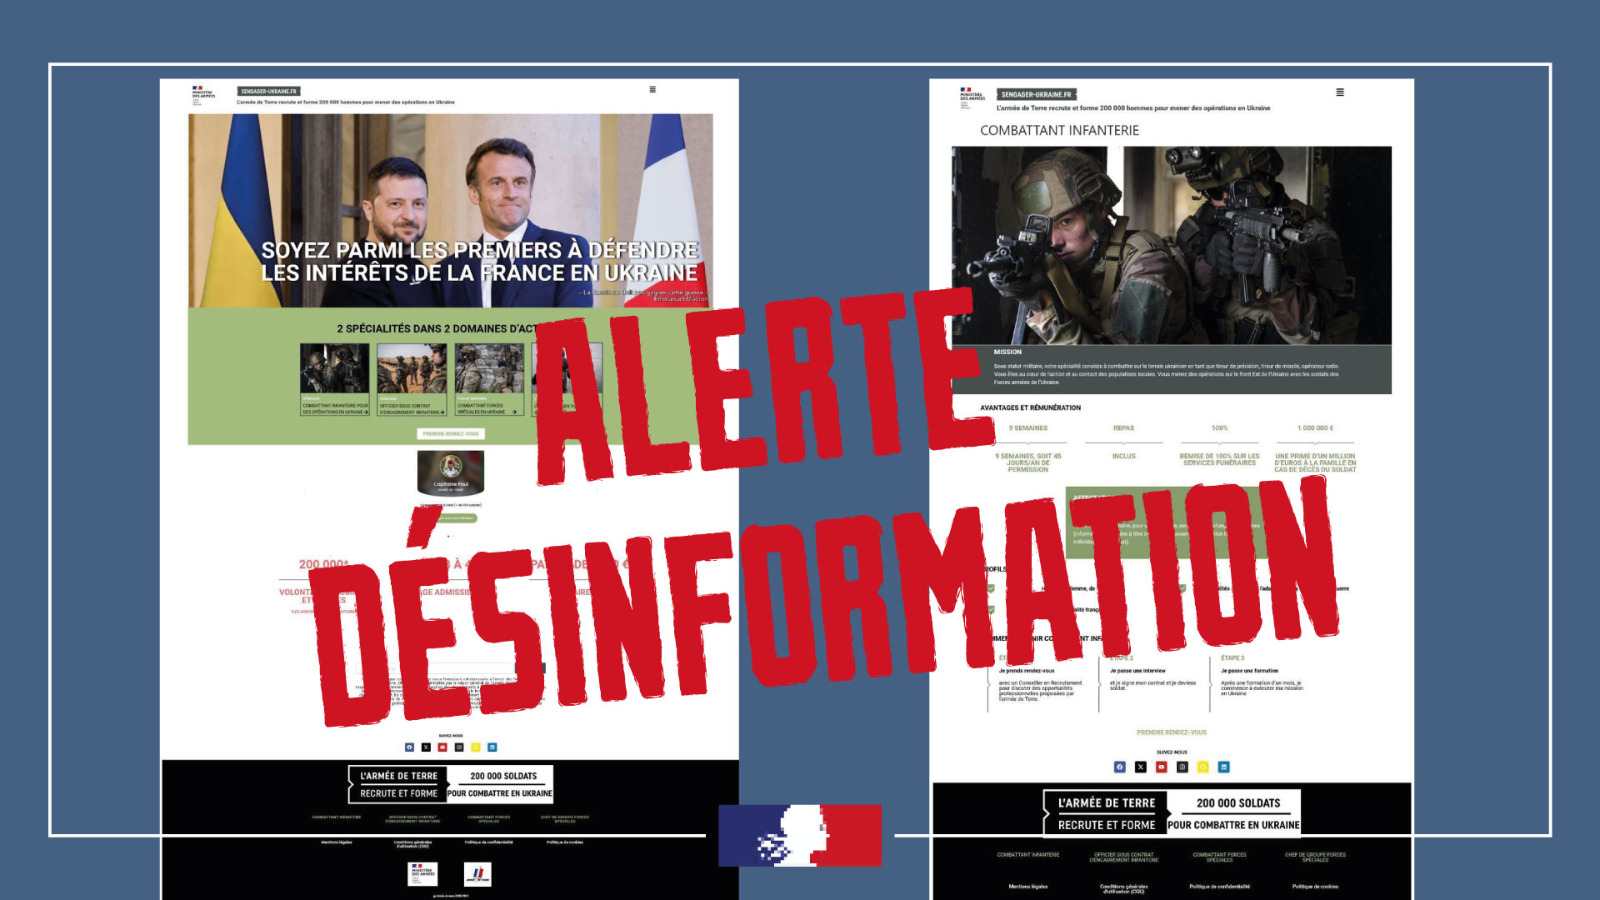 France has blocked a fake website recruiting volunteers for the war in Ukraine